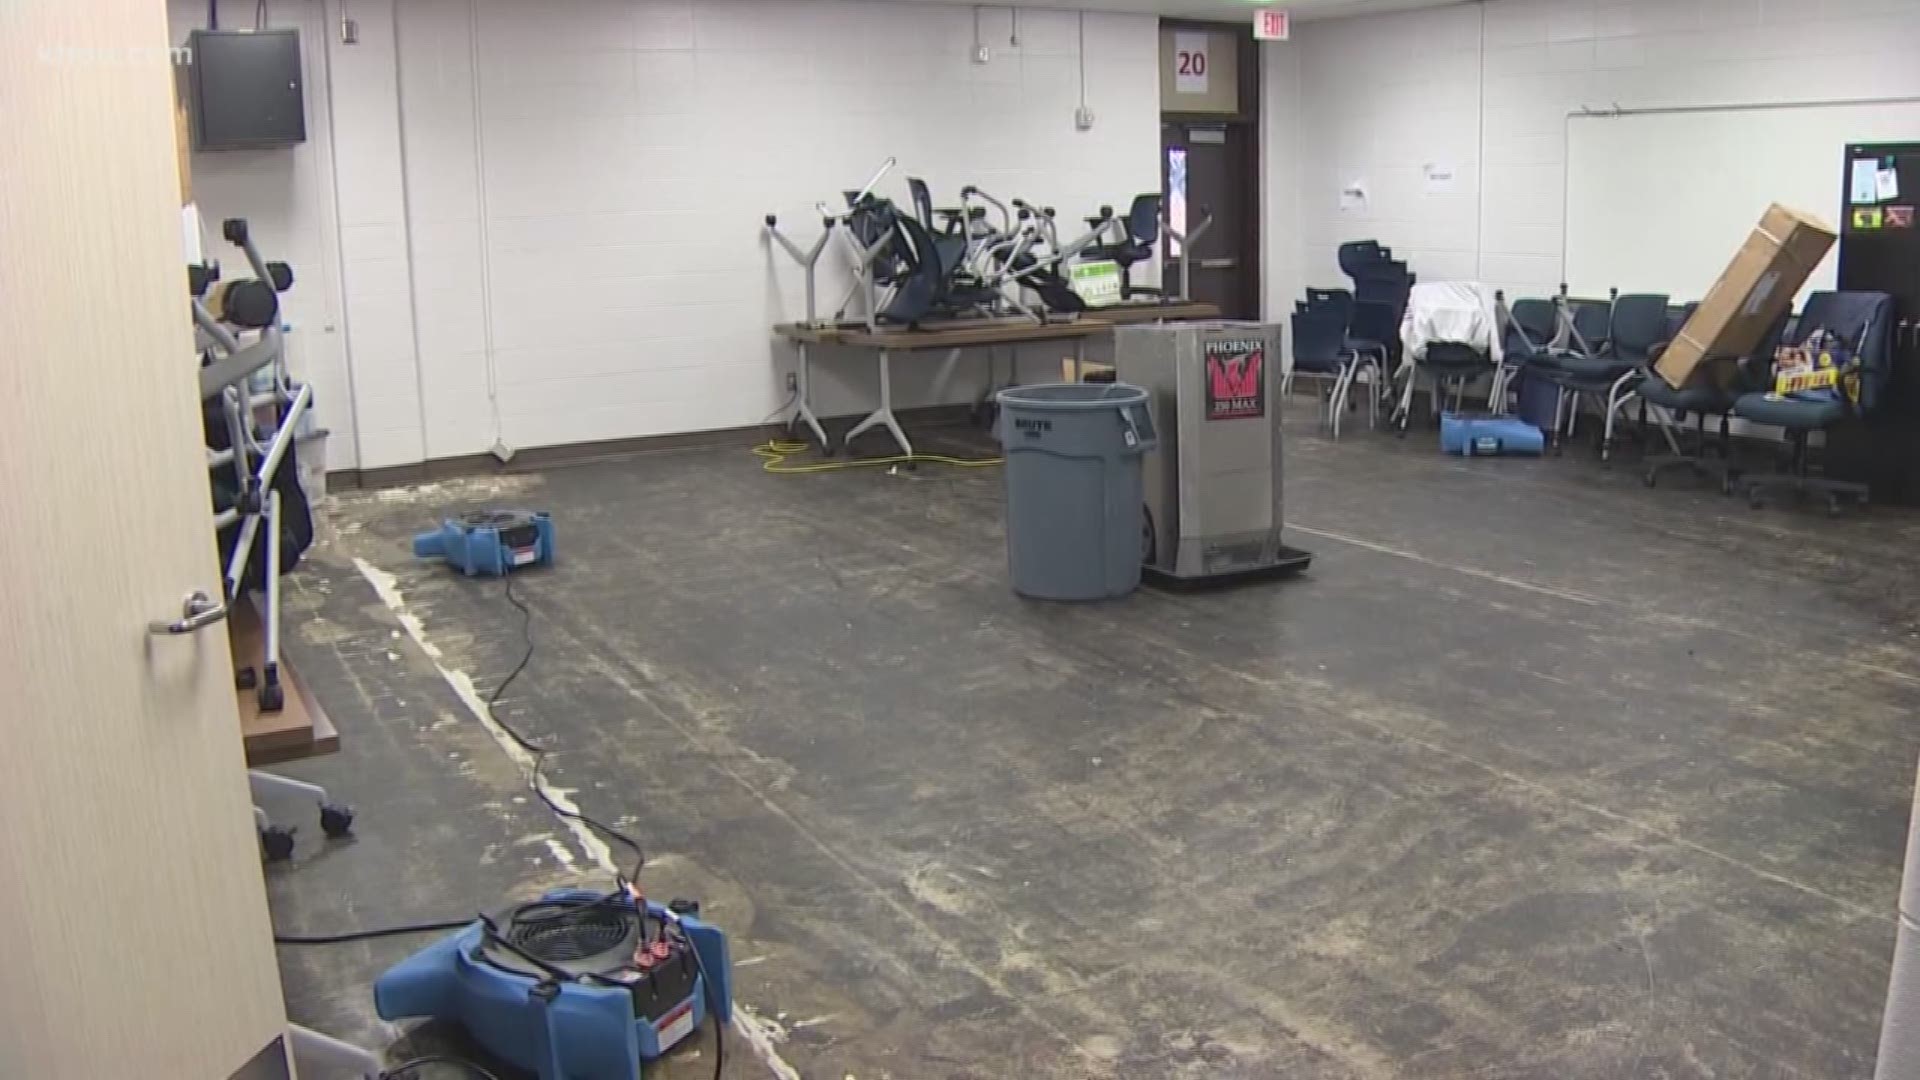 During Friday's severe storms, Kingwood High School was damaged again by flooding.